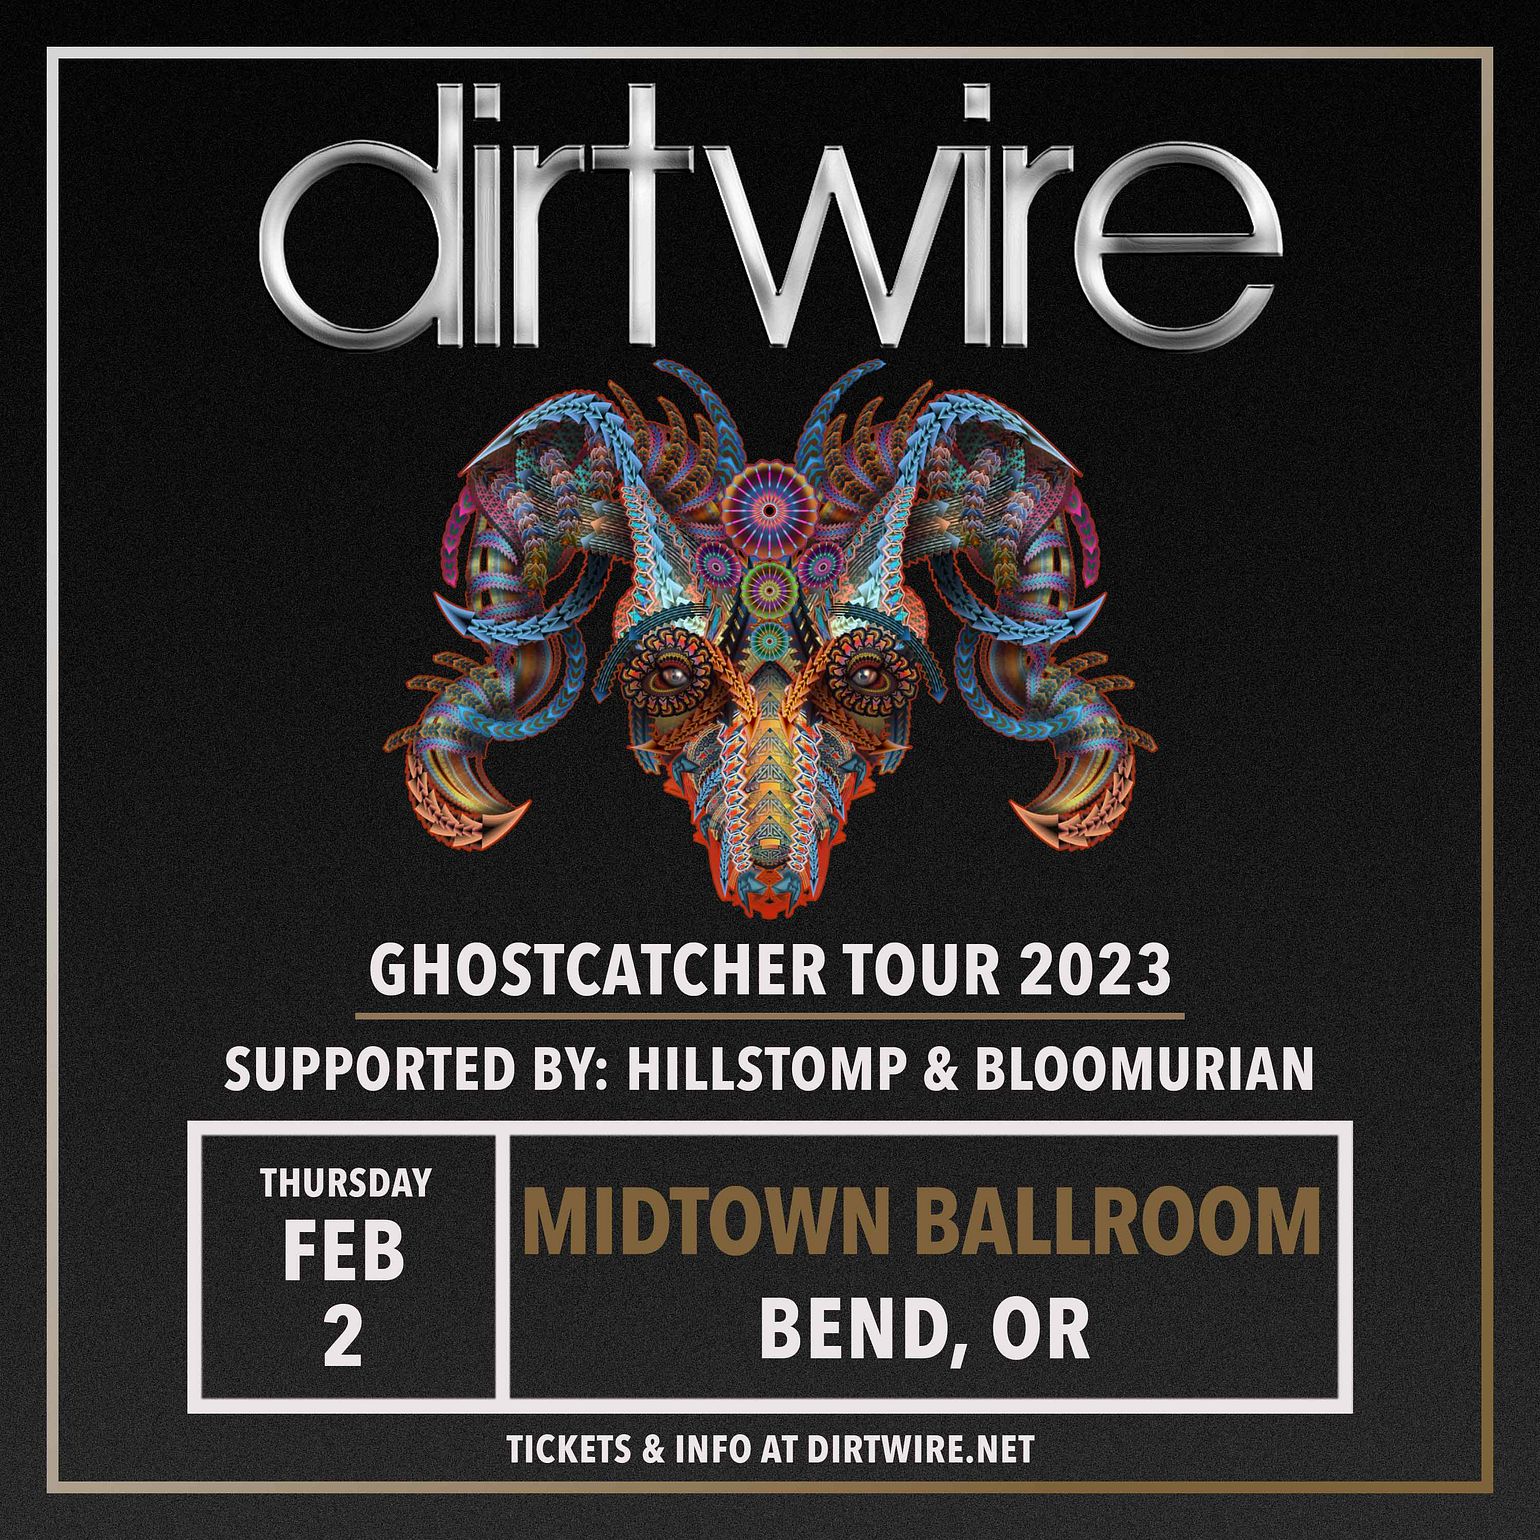 Dirtwire Ghostcatcher Tour with Hillstomp & Bloomurian 2023 Tickets at